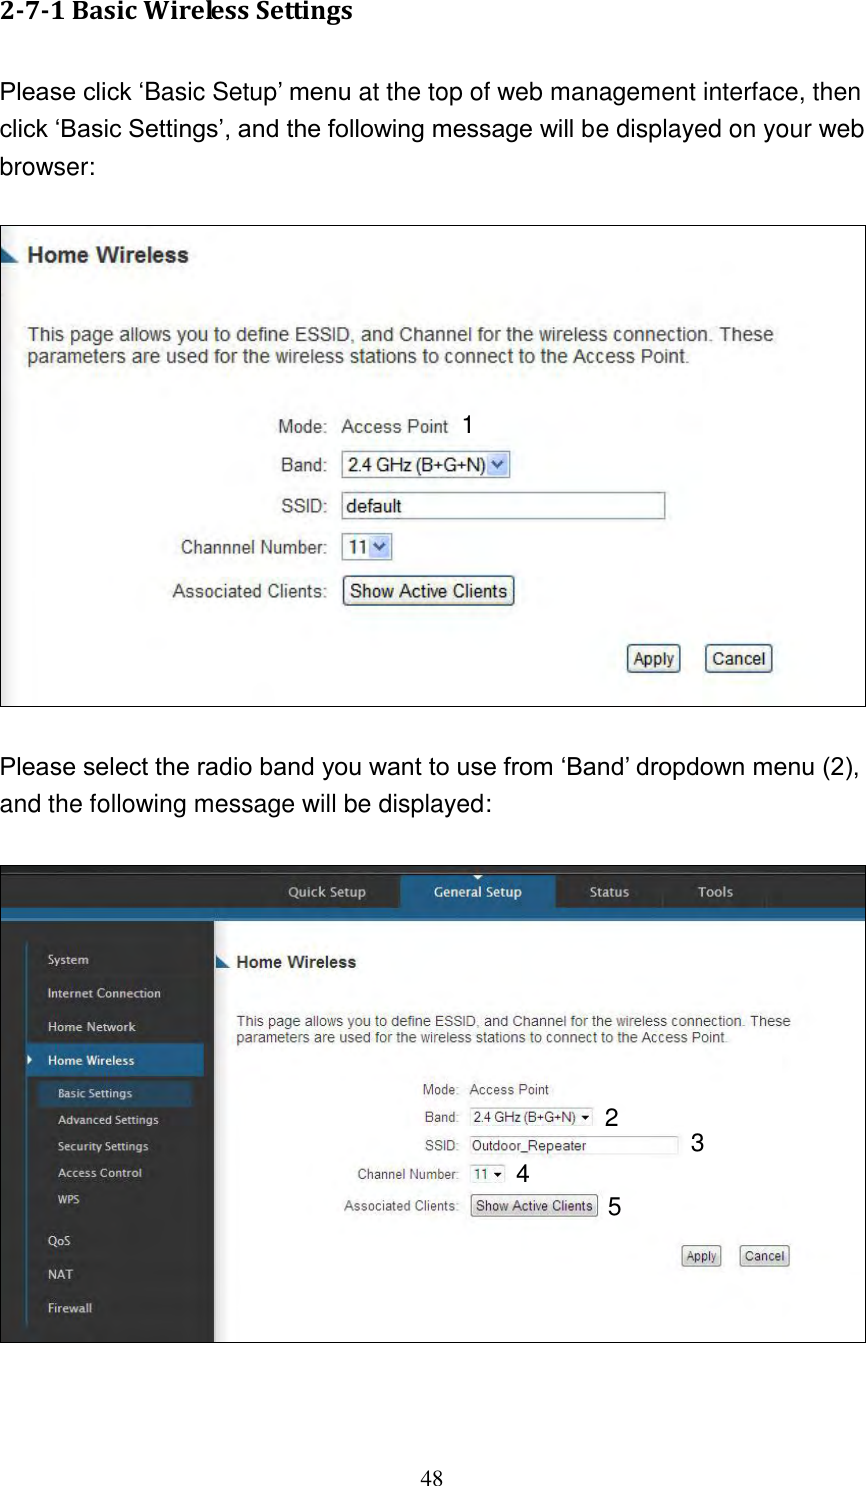 48 2-7-1 Basic Wireless Settings  Please click „Basic Setup‟ menu at the top of web management interface, then click „Basic Settings‟, and the following message will be displayed on your web browser:    Please select the radio band you want to use from „Band‟ dropdown menu (2), and the following message will be displayed:     1 2 3 4 5 